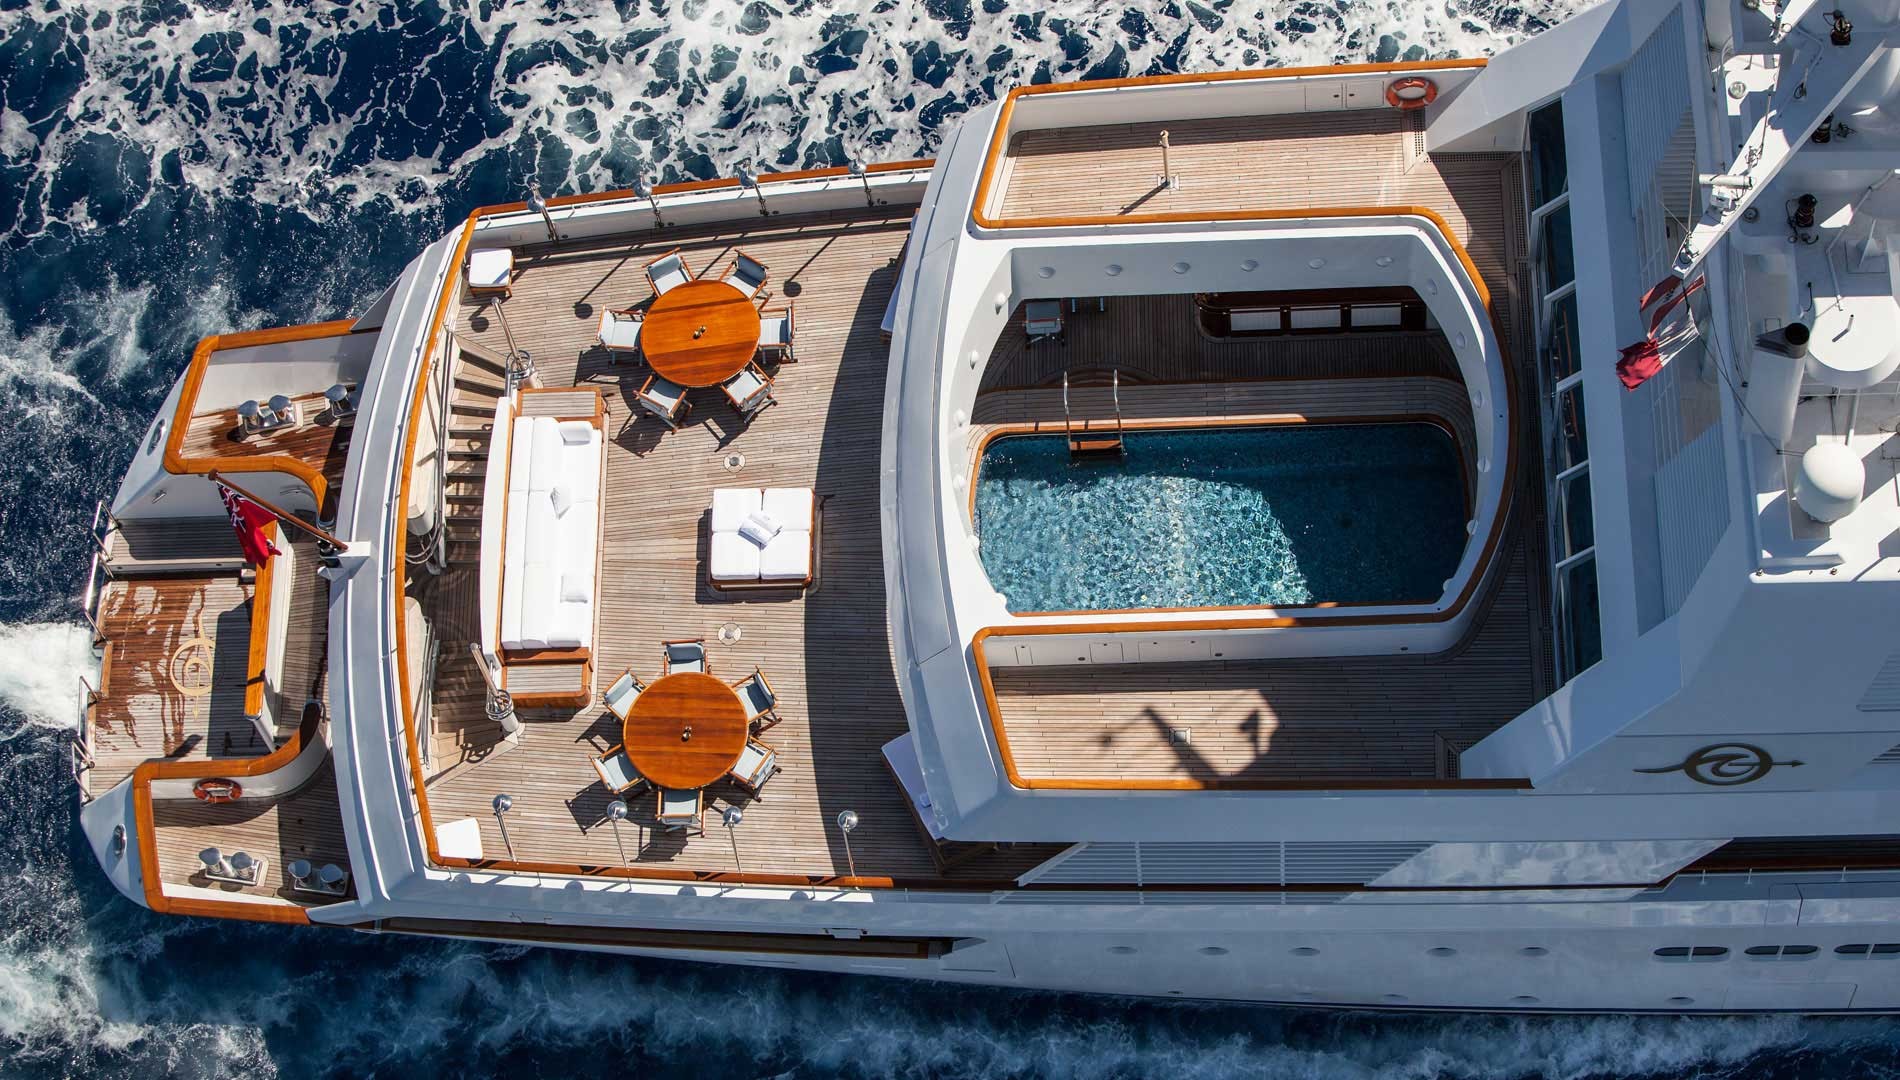 Grand Ocean Yacht Aerial View Of Aft Deck And Swimming Pool